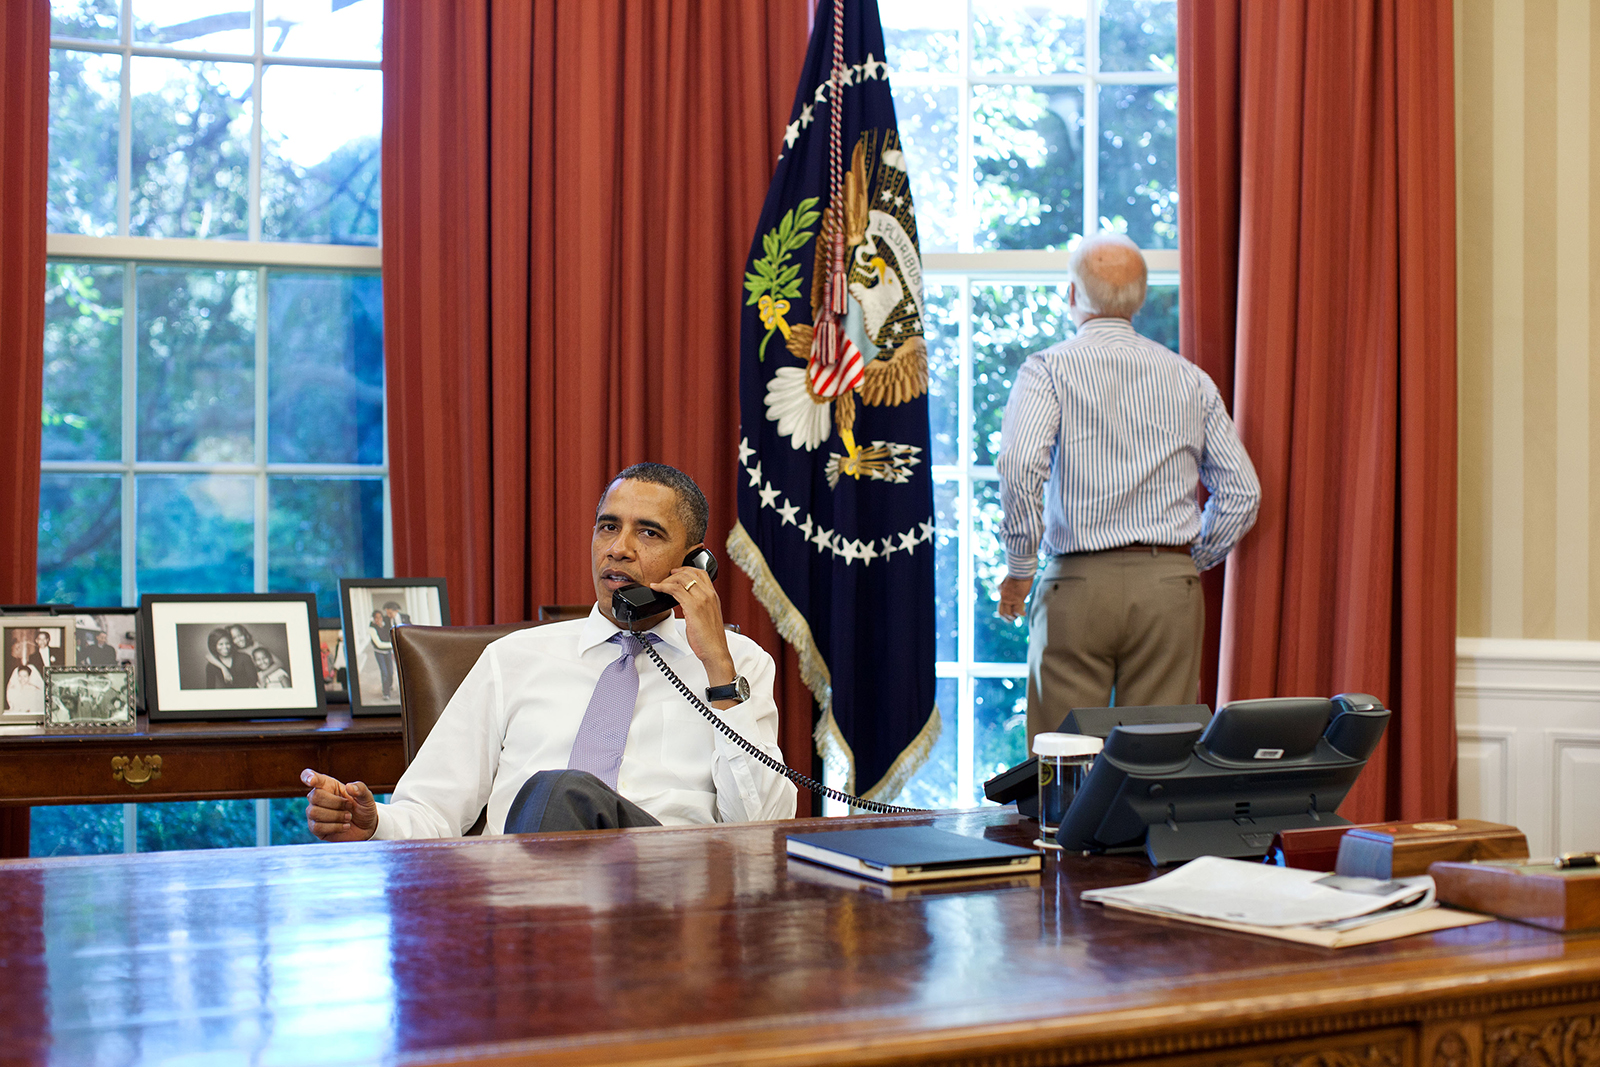 In this photo taken on July 31, 2011, then-Vice President Joe Biden (R) looks out the window as U.S. President Barack Obama talks on the phone with House Speaker John Boehner in the Oval Office to discuss ongoing efforts in the debt limit and deficit reduction talks in Washington, DC.